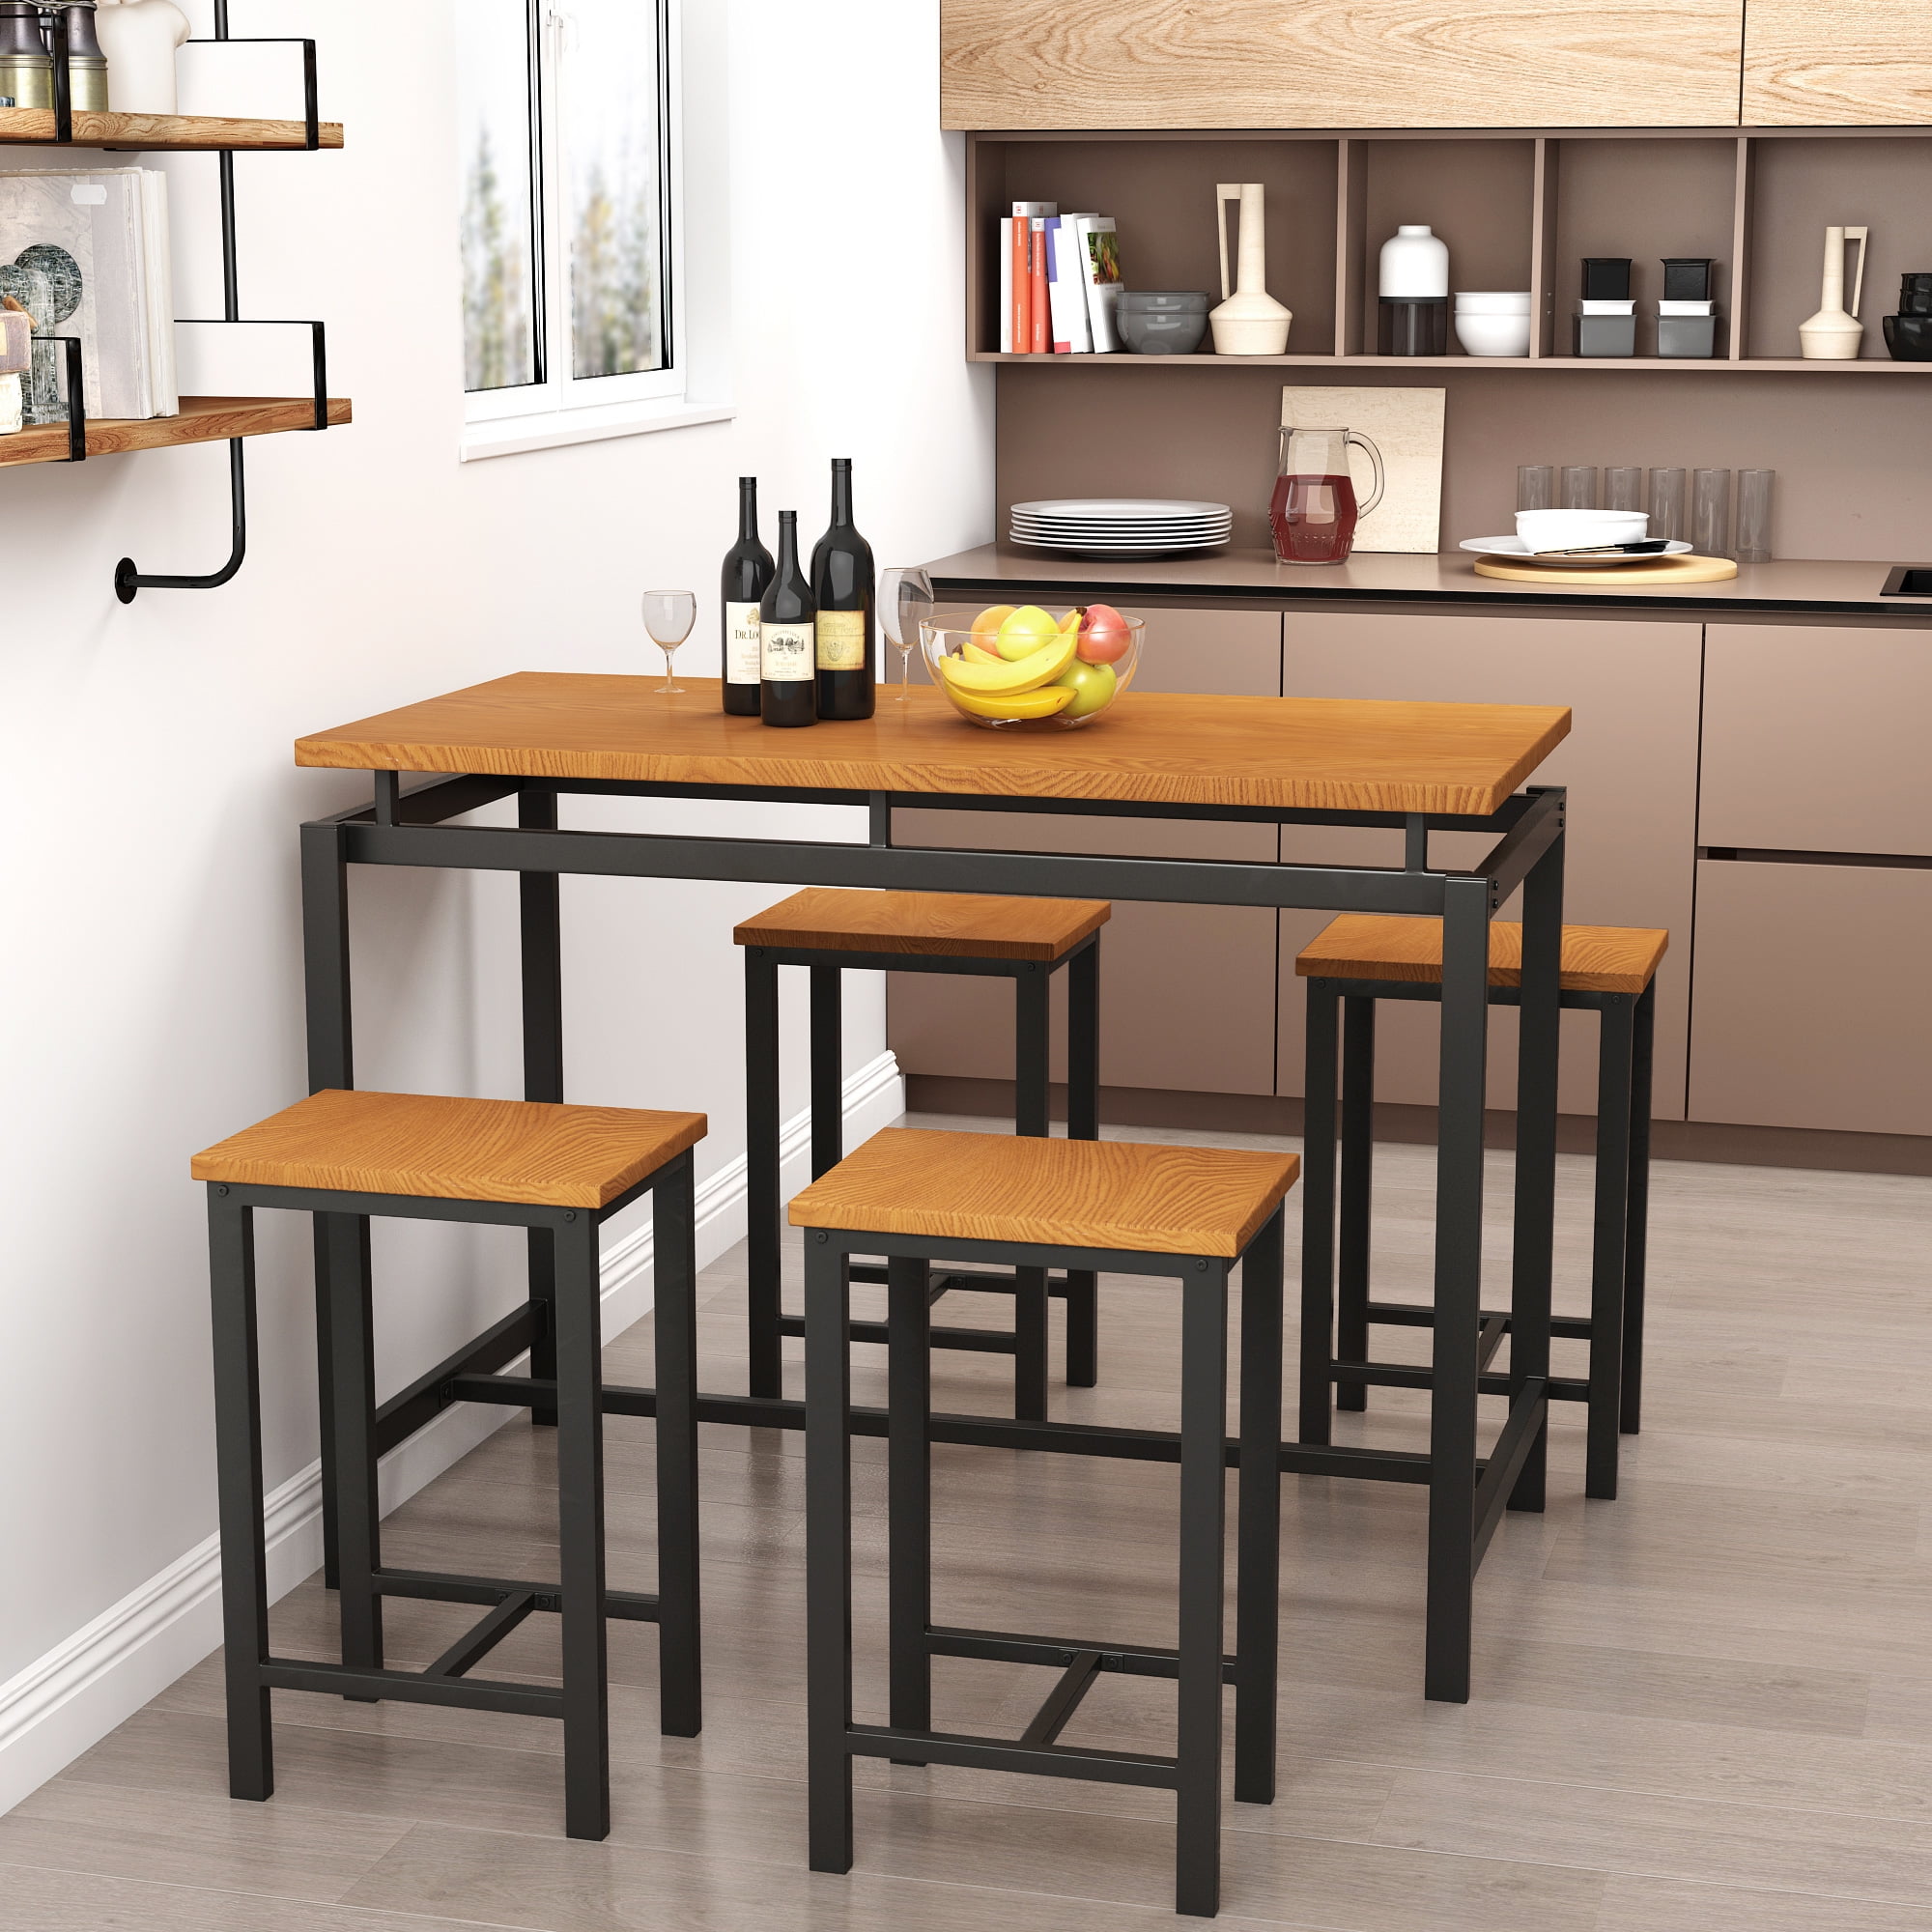 Wood Pub Table Set Counter Height Kitchen Dinner Bar Dining Home Height Stools 